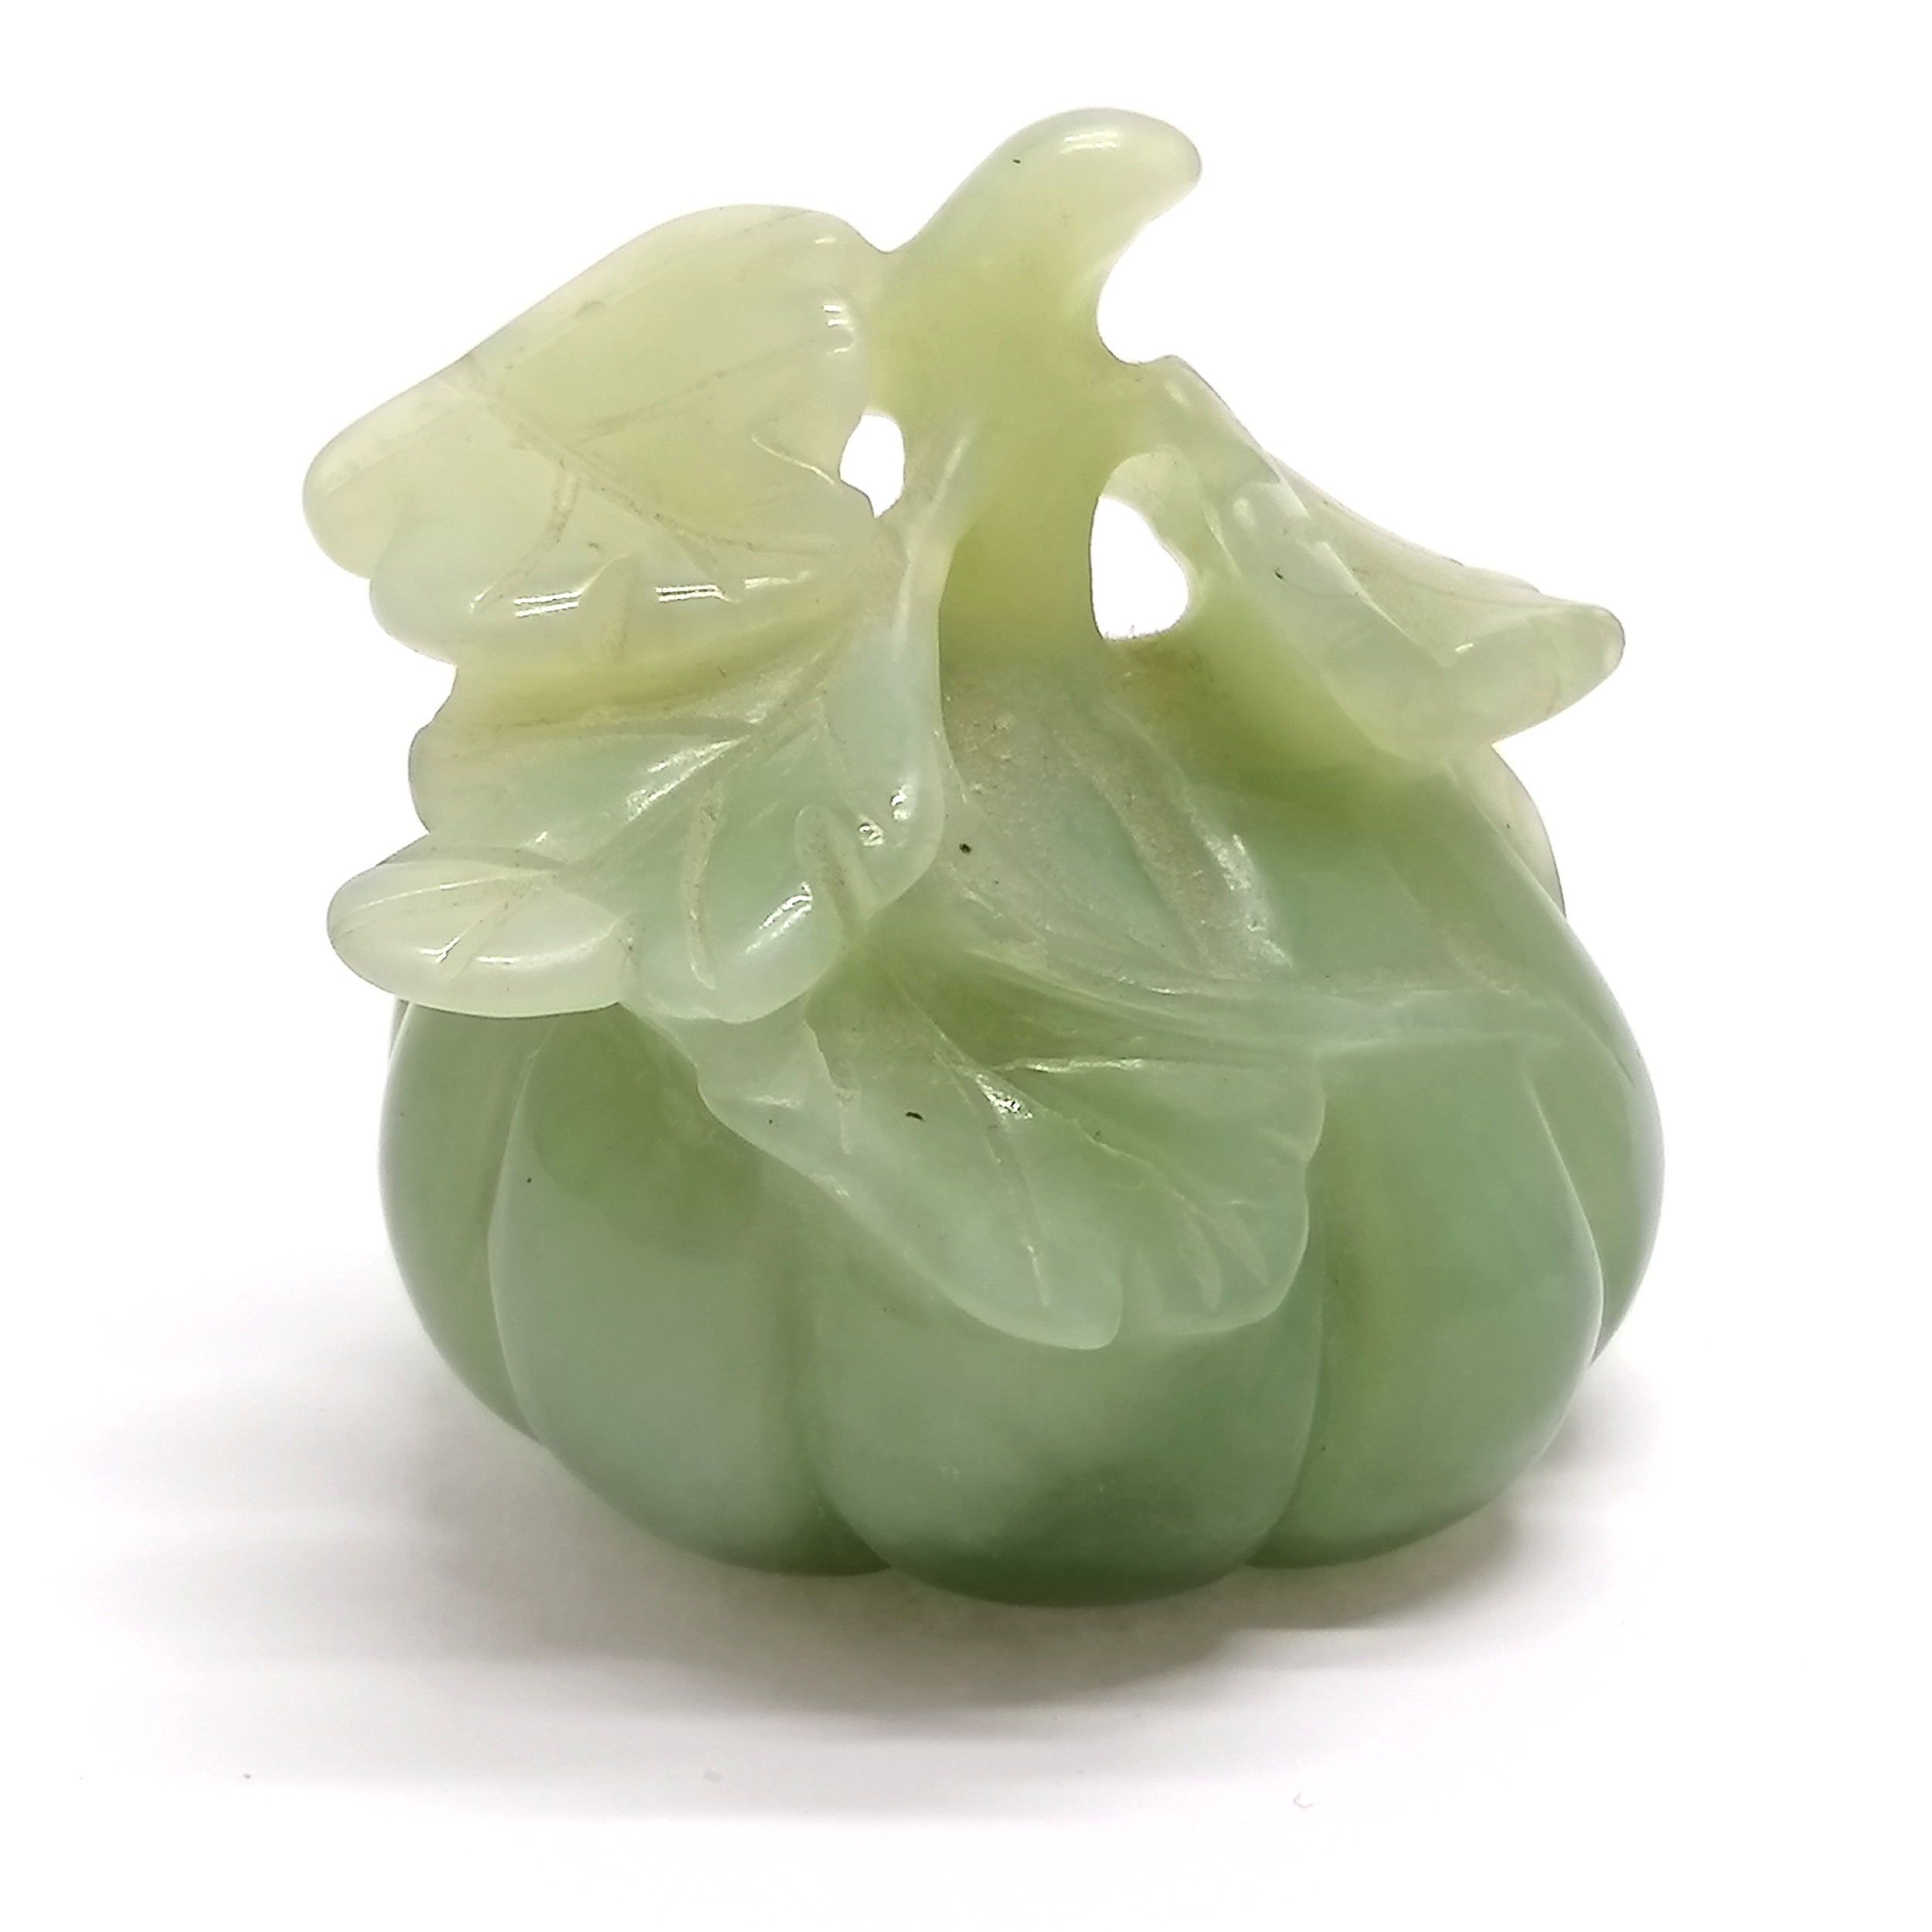 Oriental hand carved hardstone jade fruit with leaves - 4.5cm high & no obvious damage